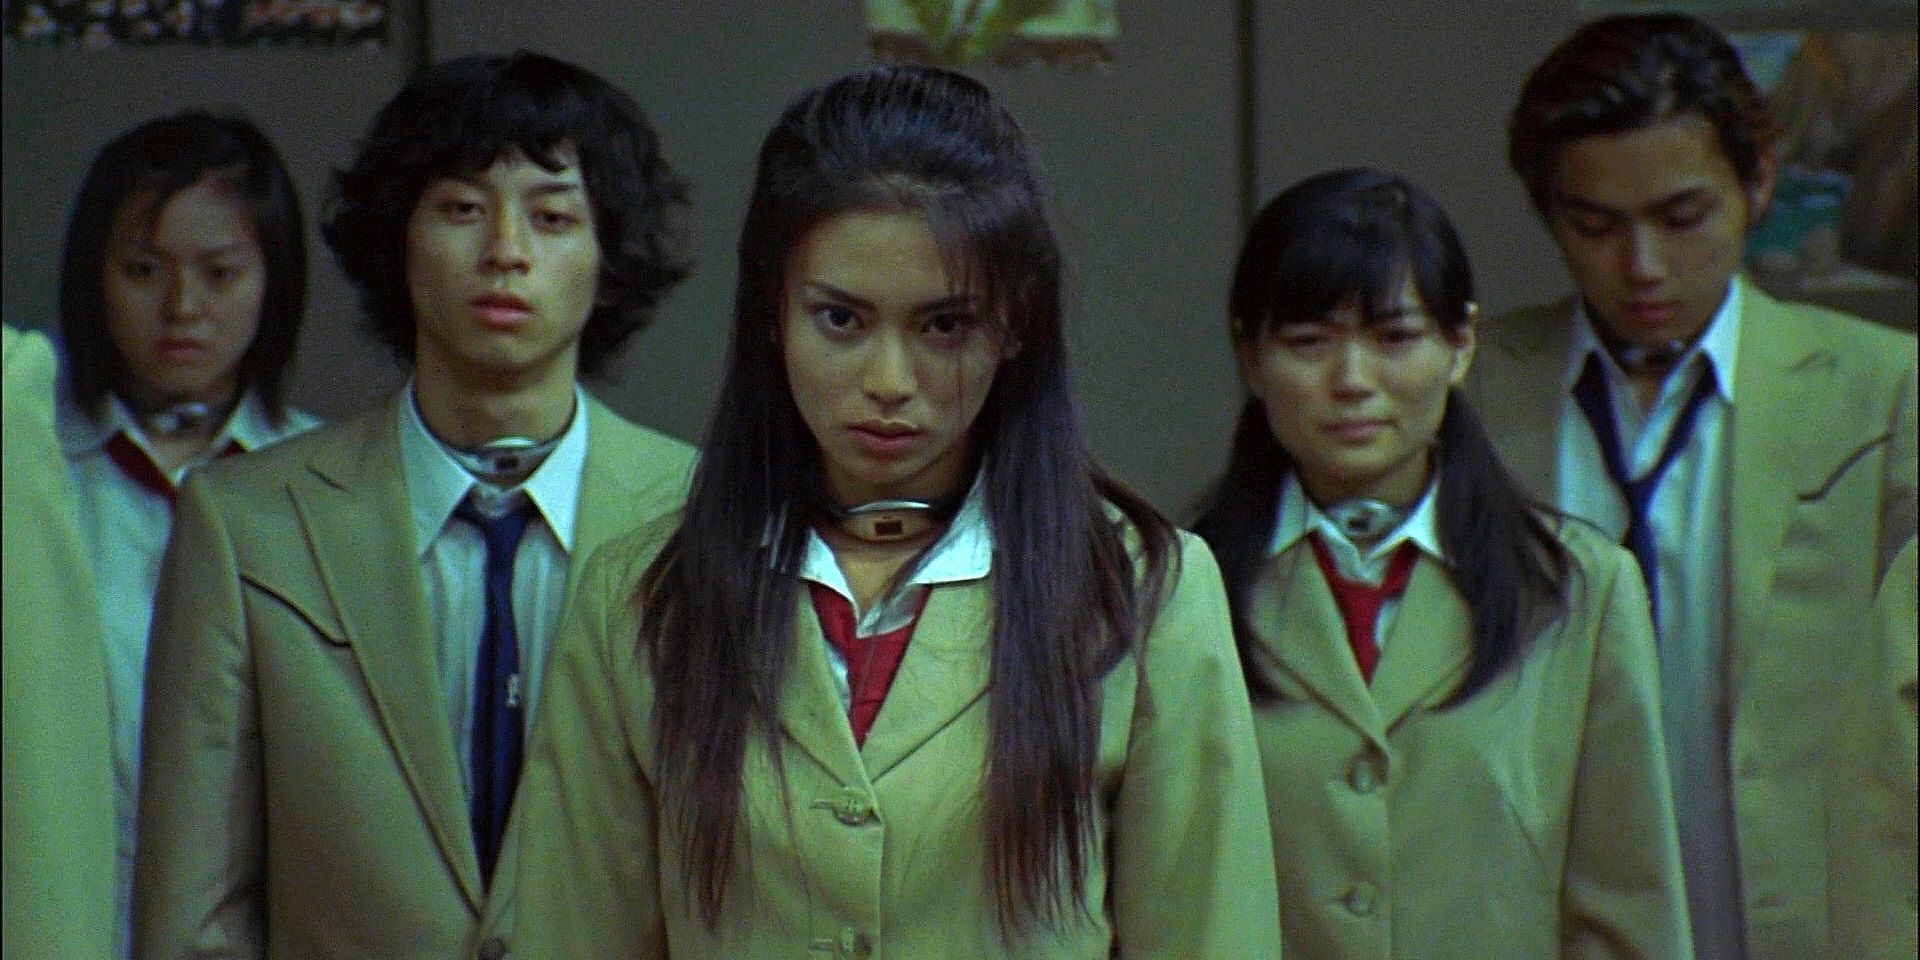 A group of teenagers in school uniforms in Battle Royale